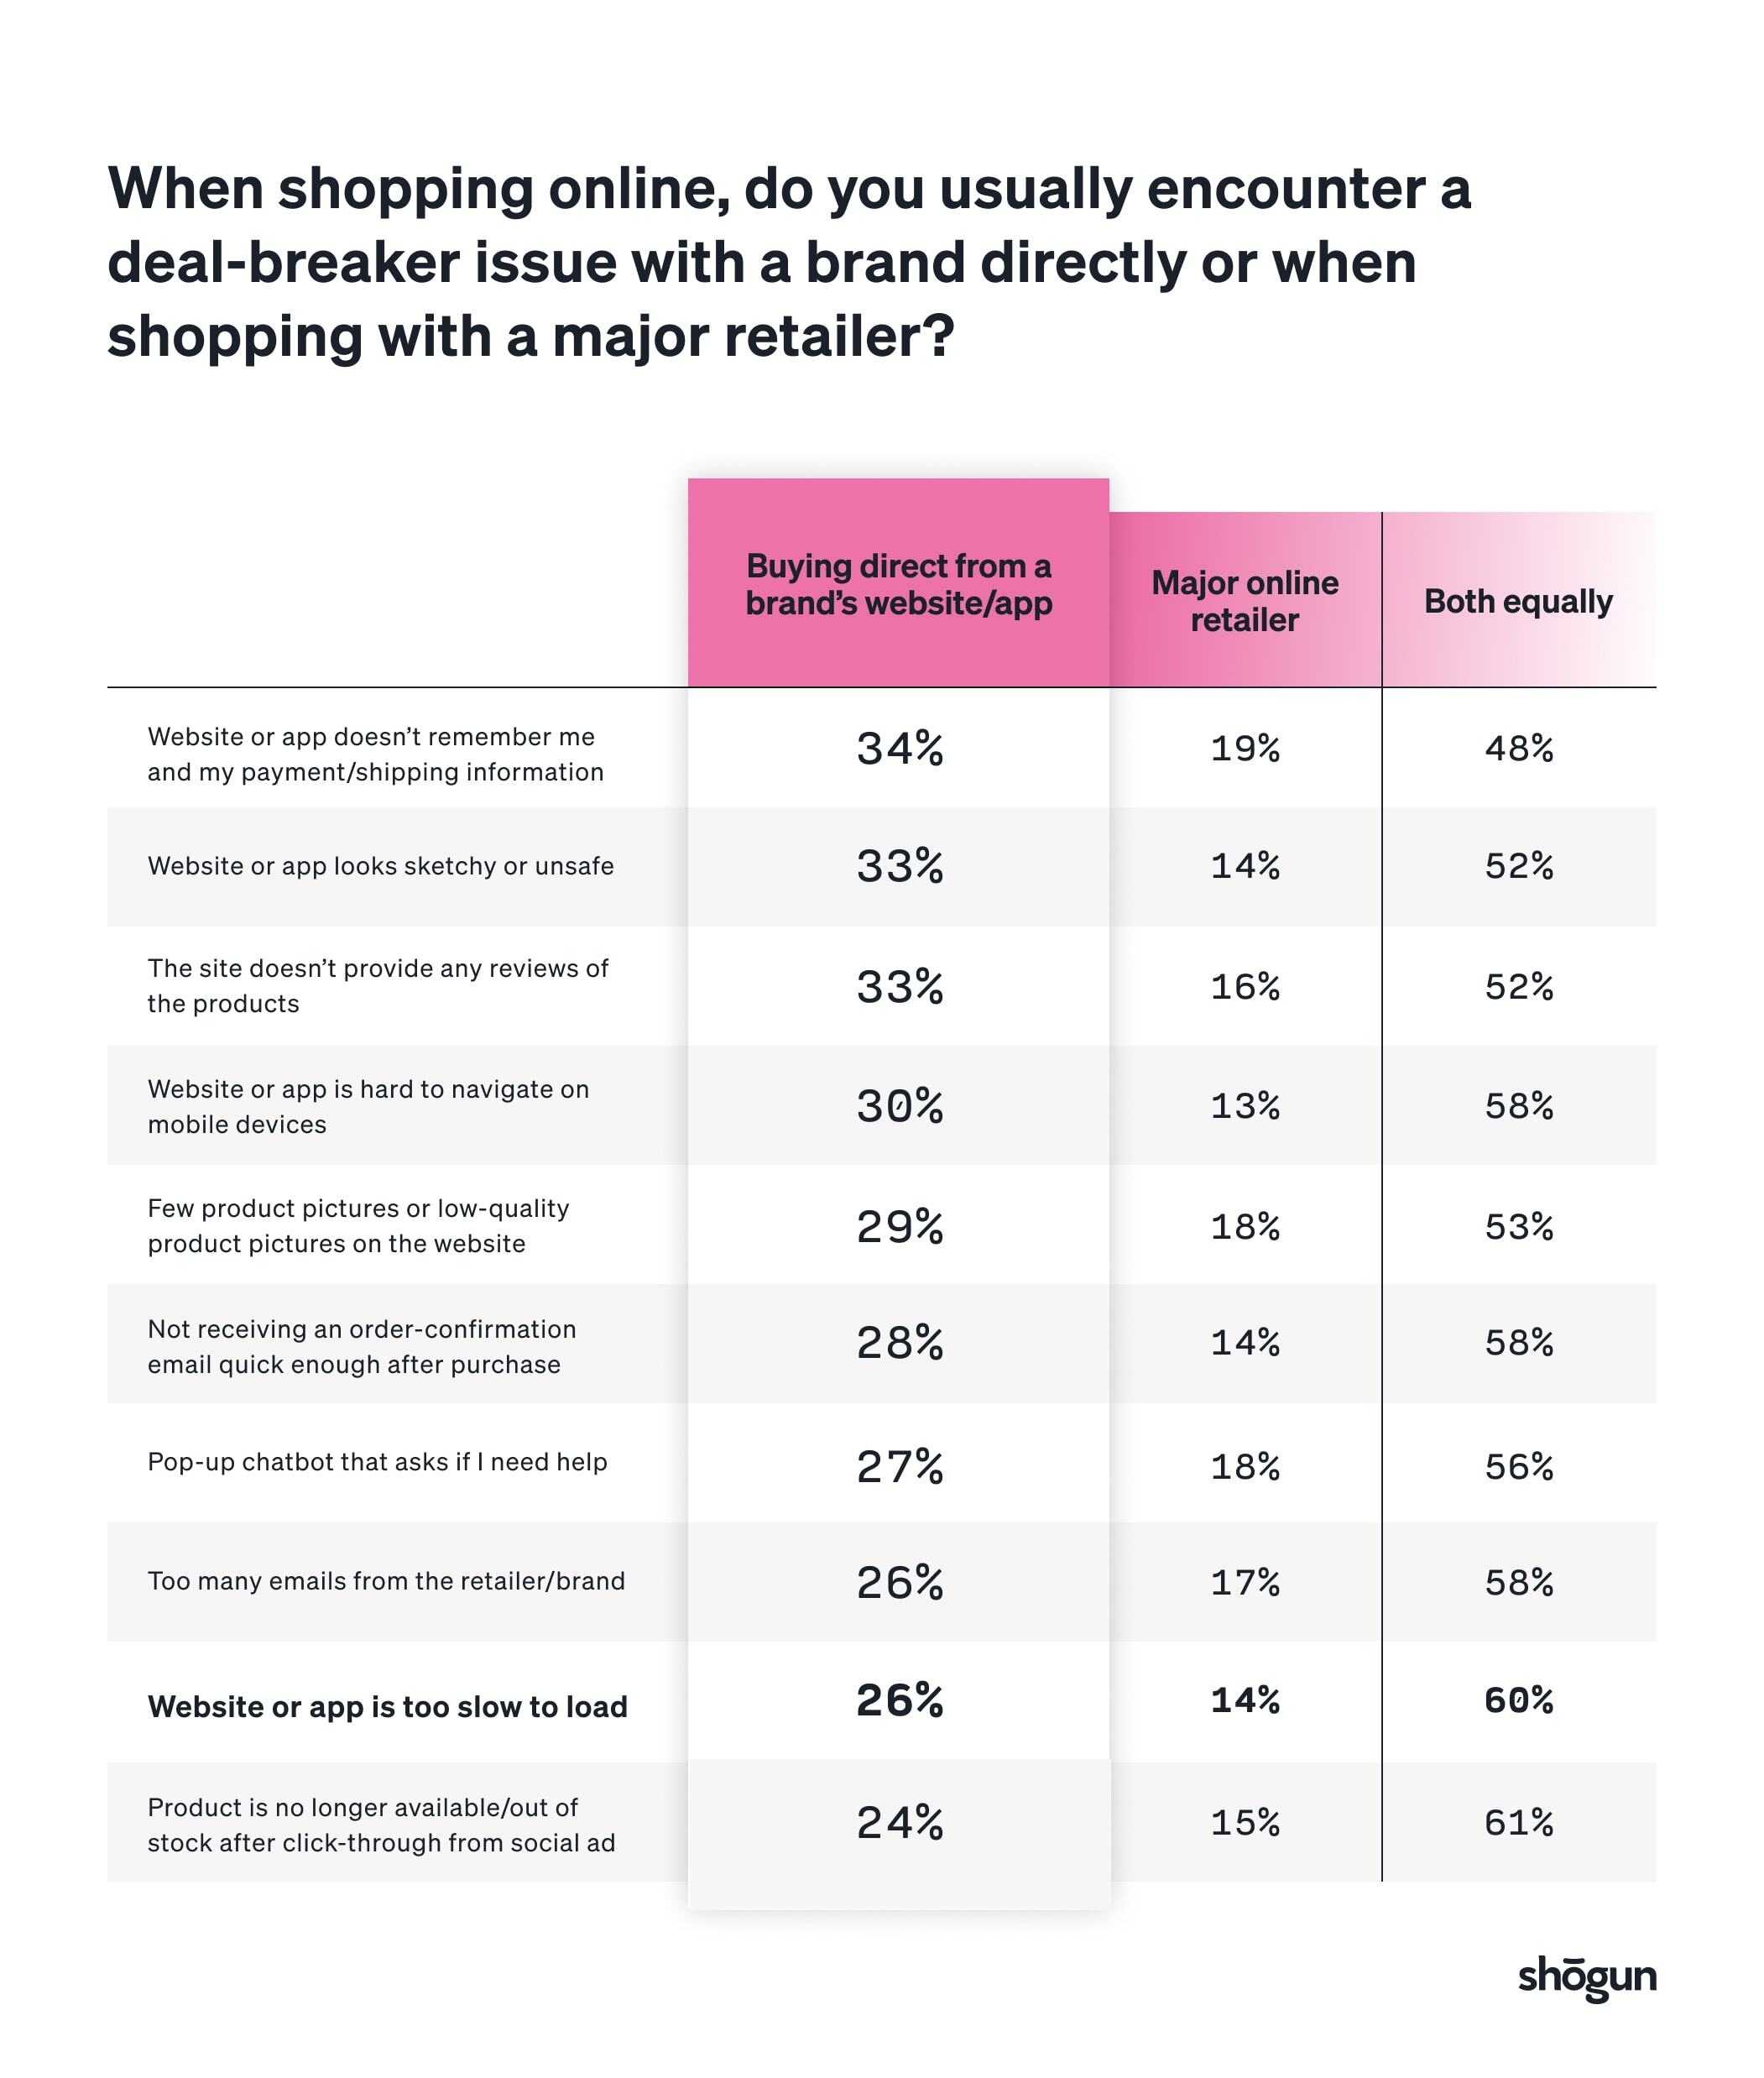 online shopper data on when consumers usually encounter a deal-break issue